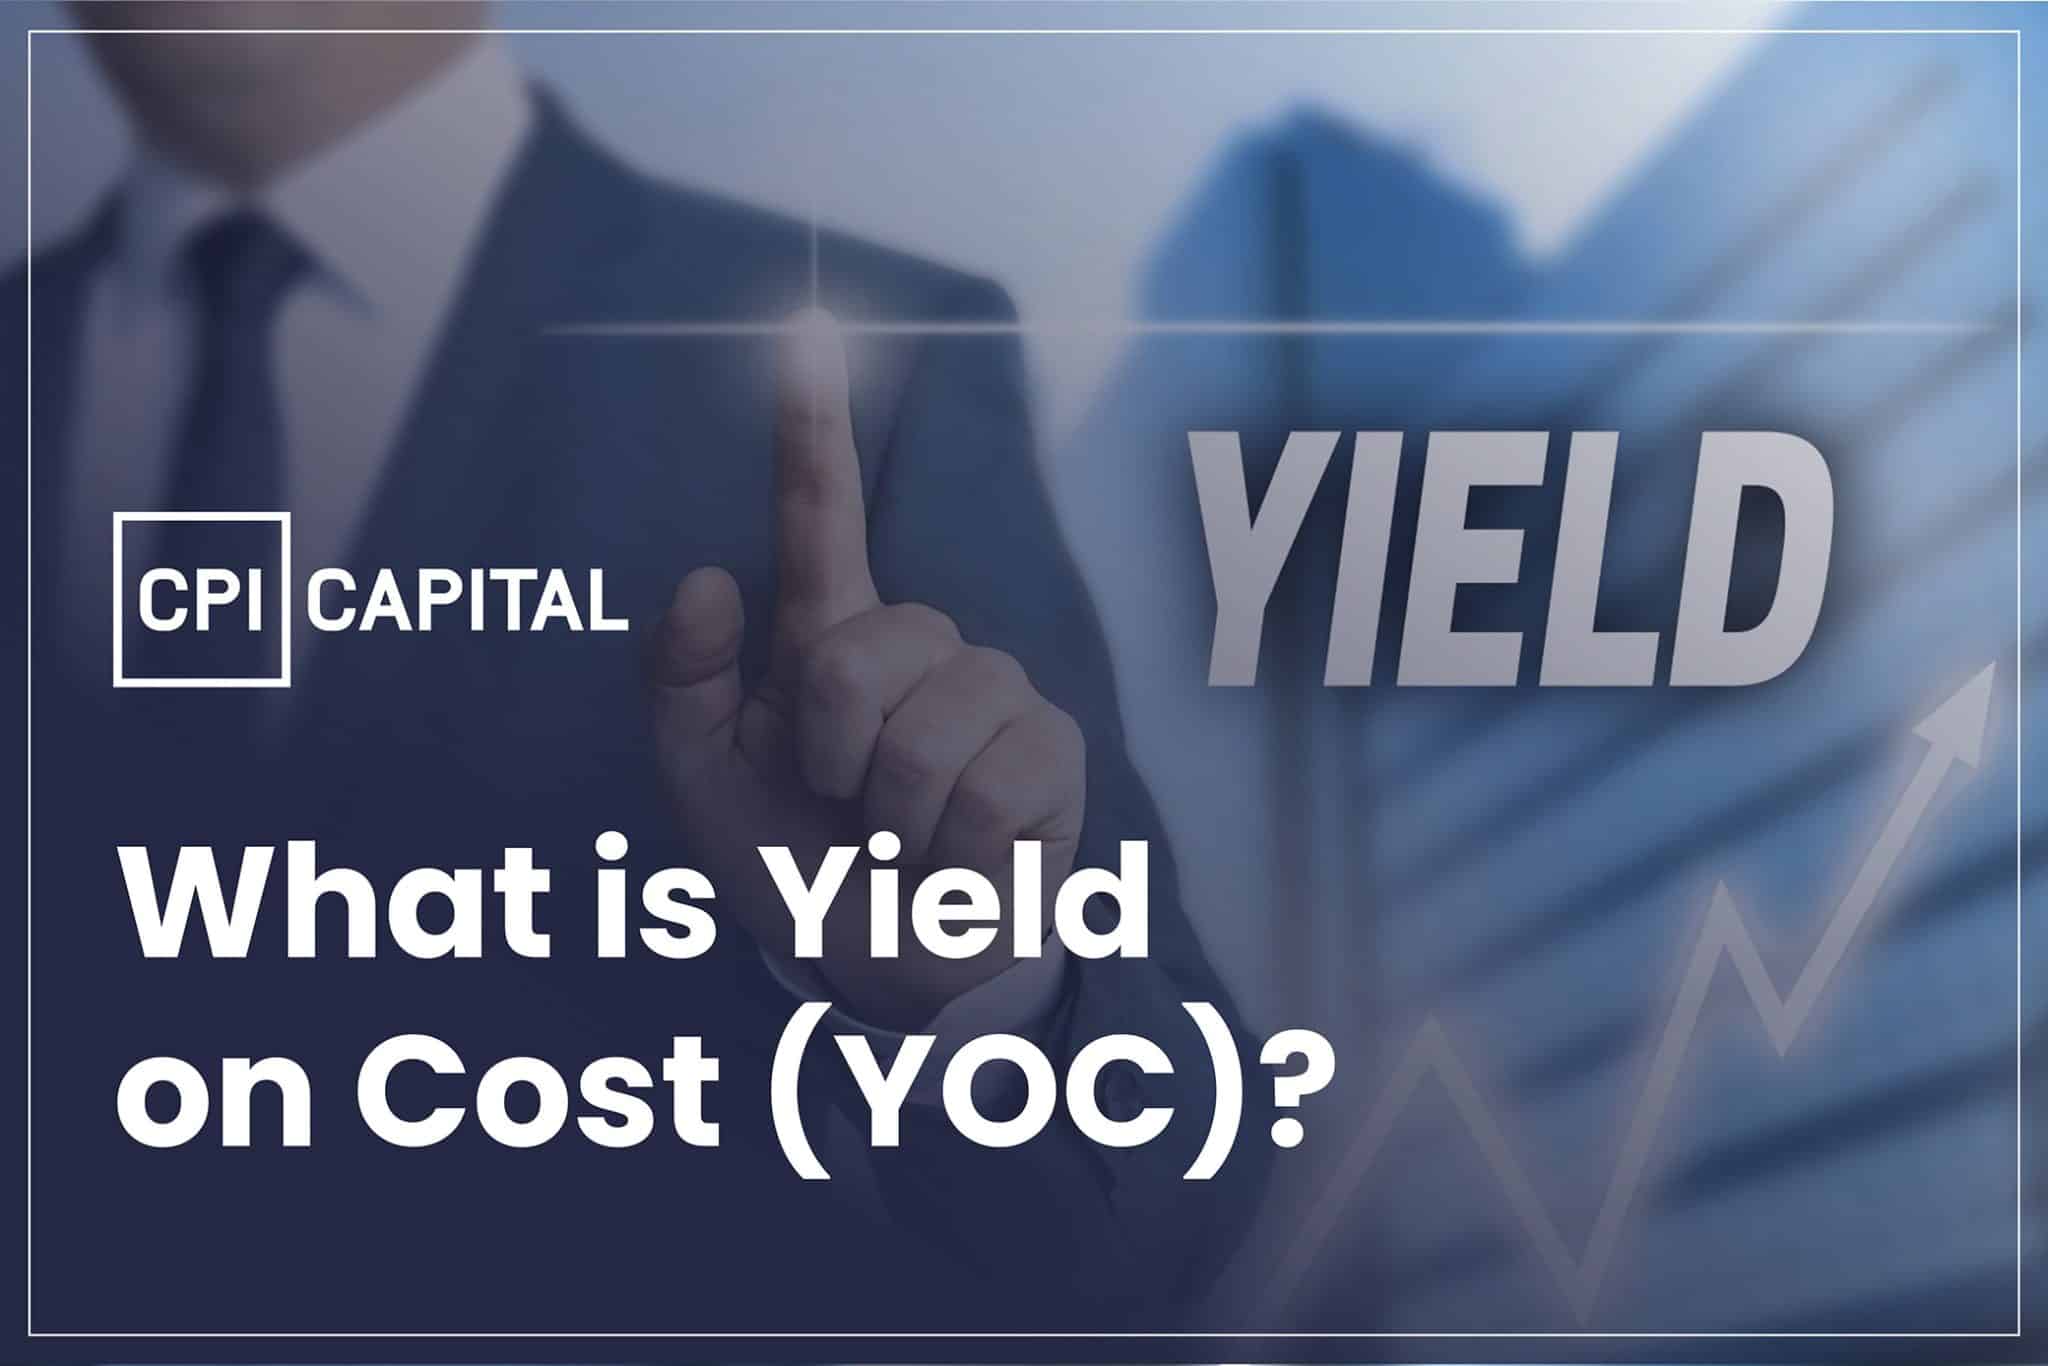 “Yield on cost” metric in private equity real estate investment – useful to assess investment returns